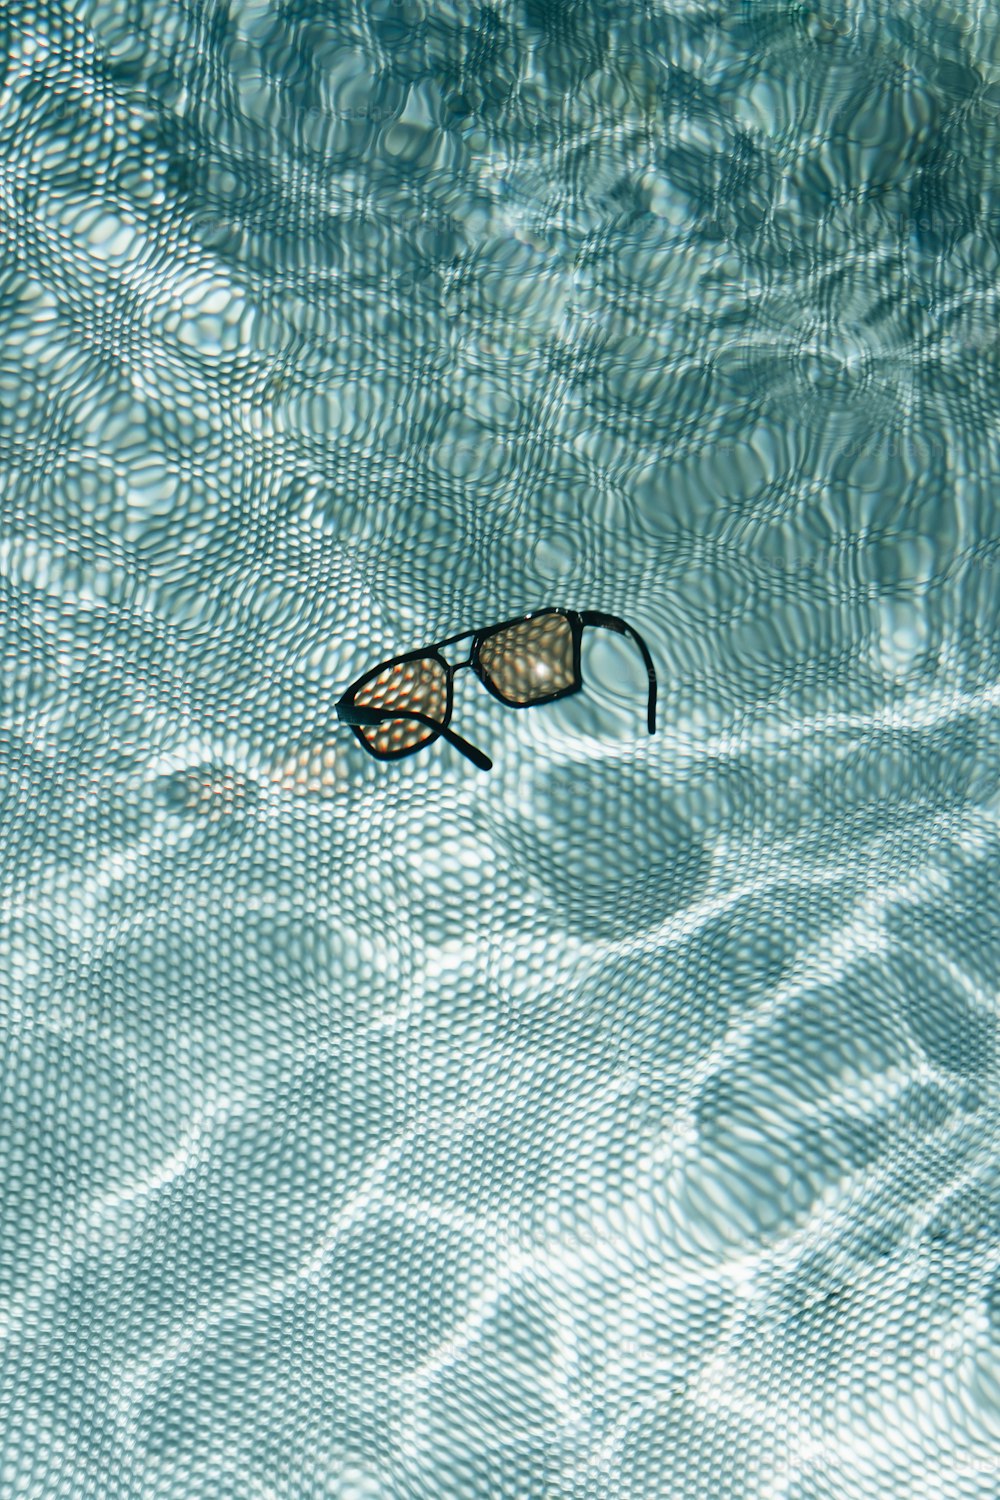 a pair of swimming goggles floating in a pool